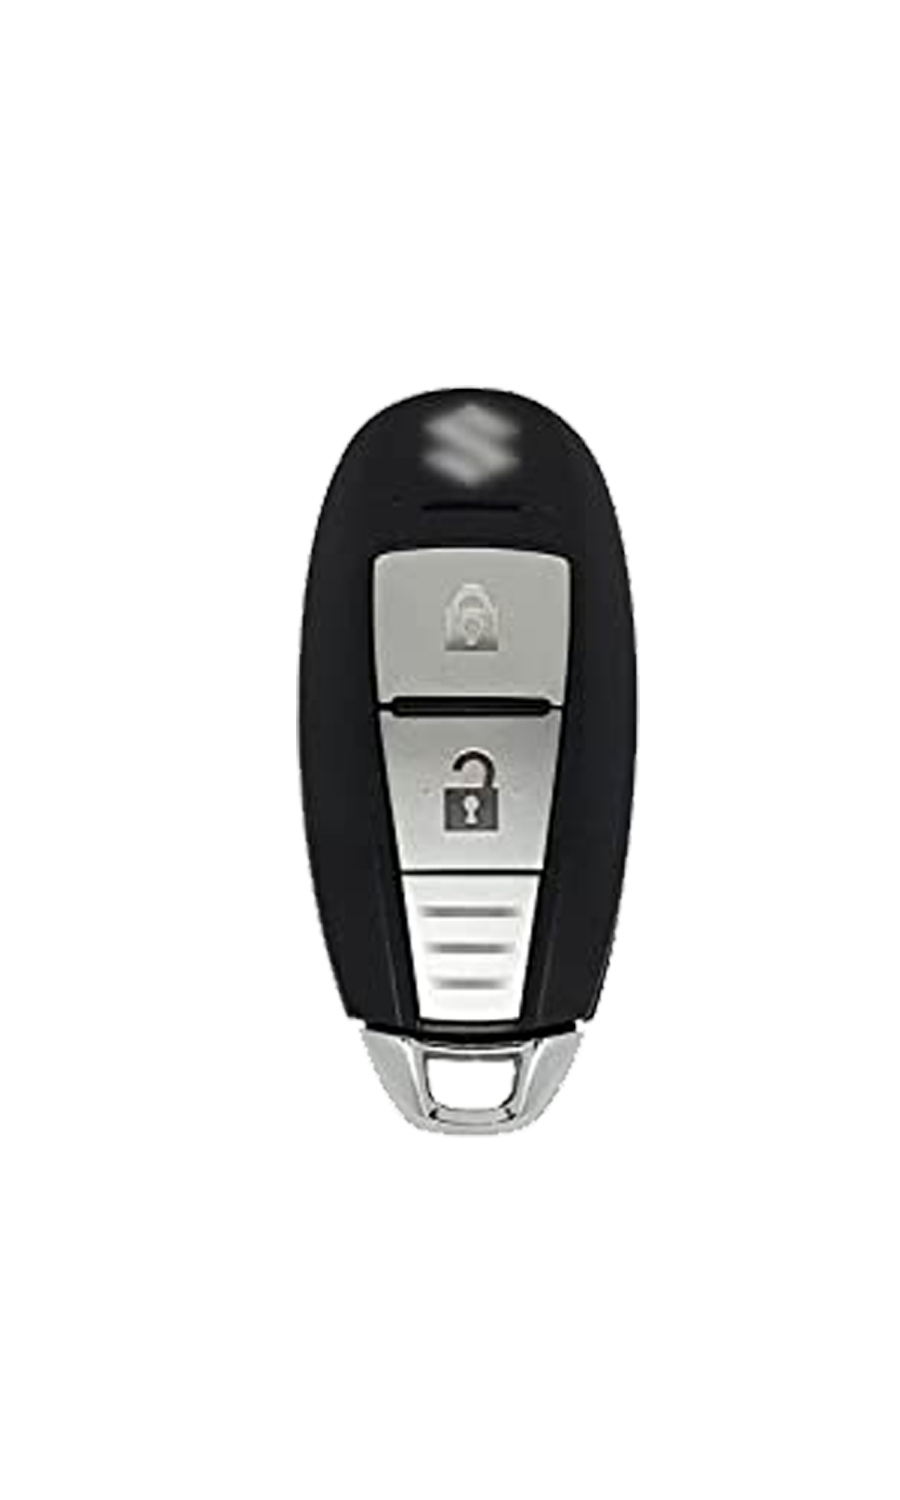 Acto TPU Gold Series Car Key Cover For Suzuki Ignis